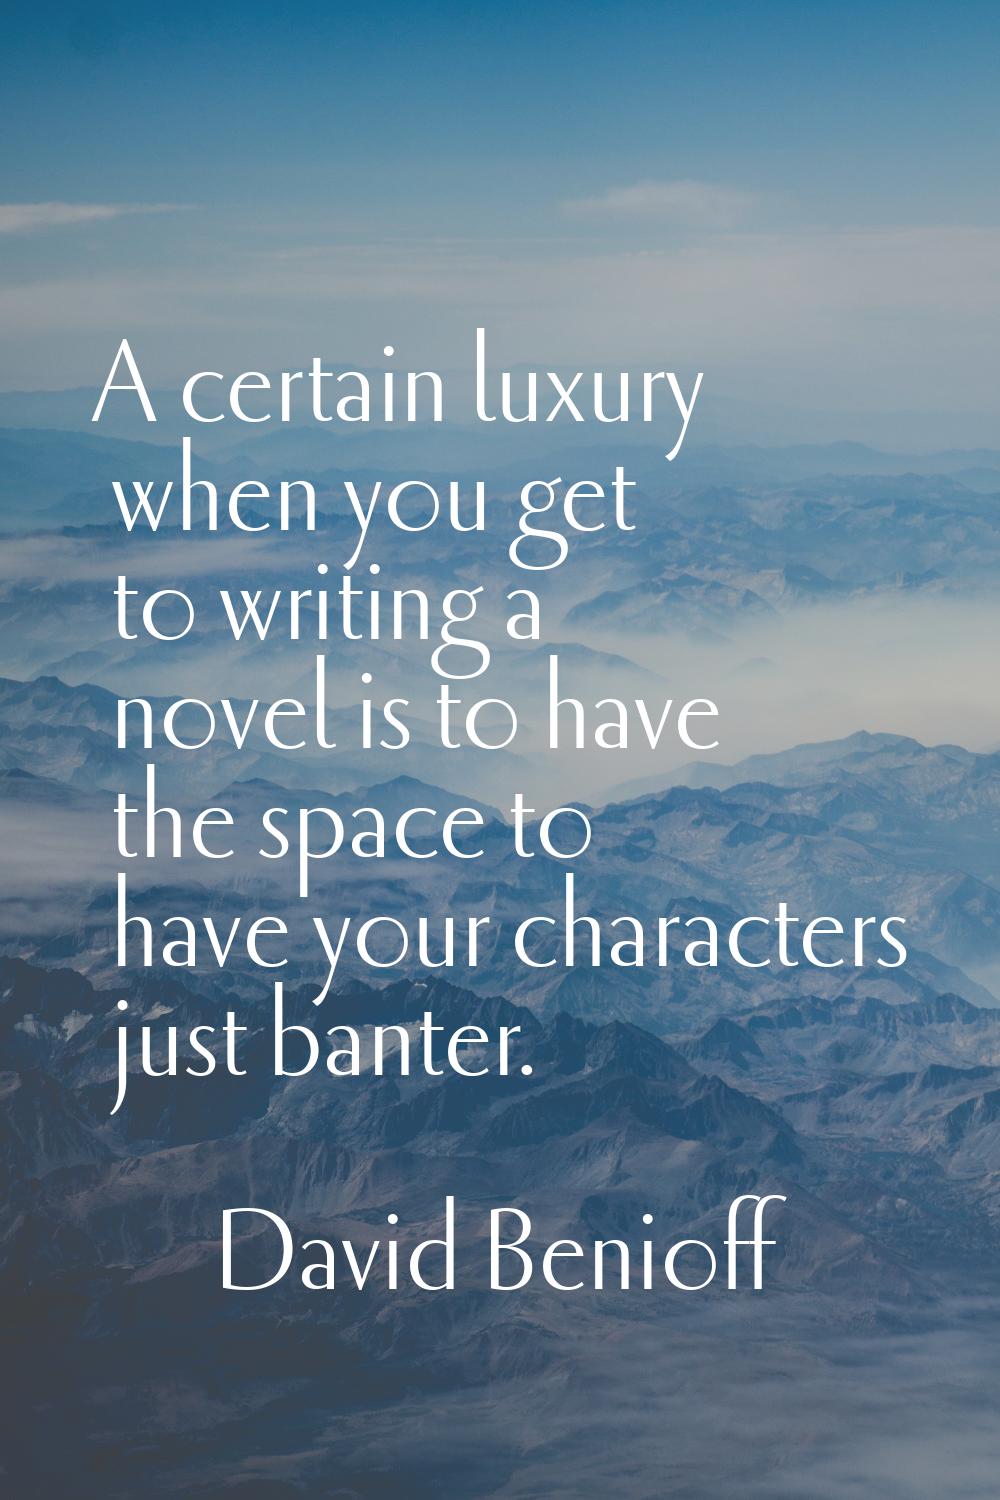 A certain luxury when you get to writing a novel is to have the space to have your characters just 